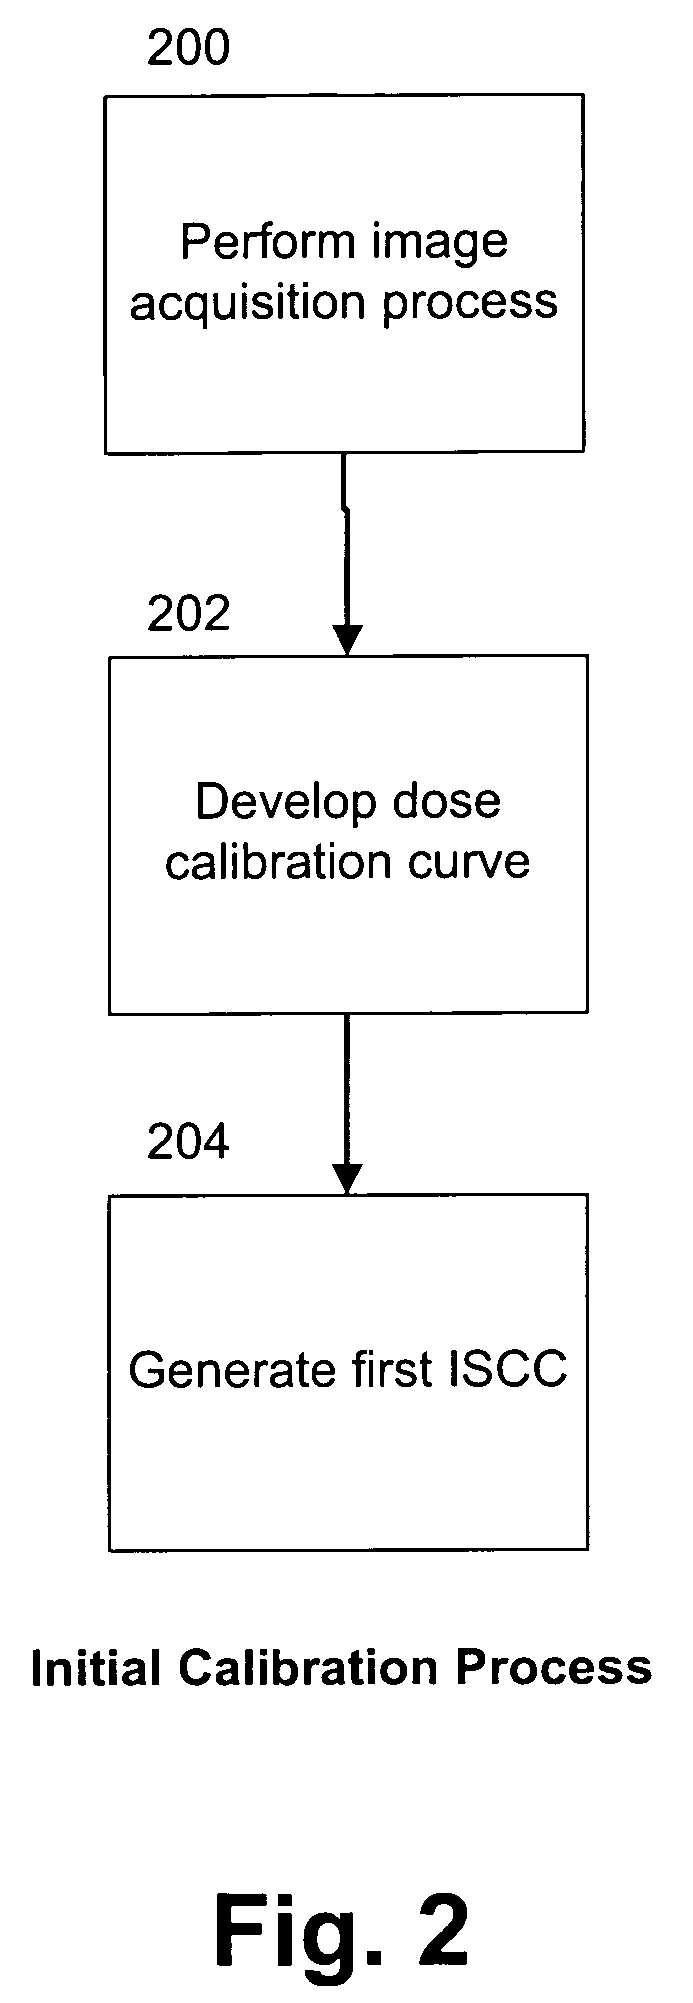 Relative and absolute calibration for dosimetric devices